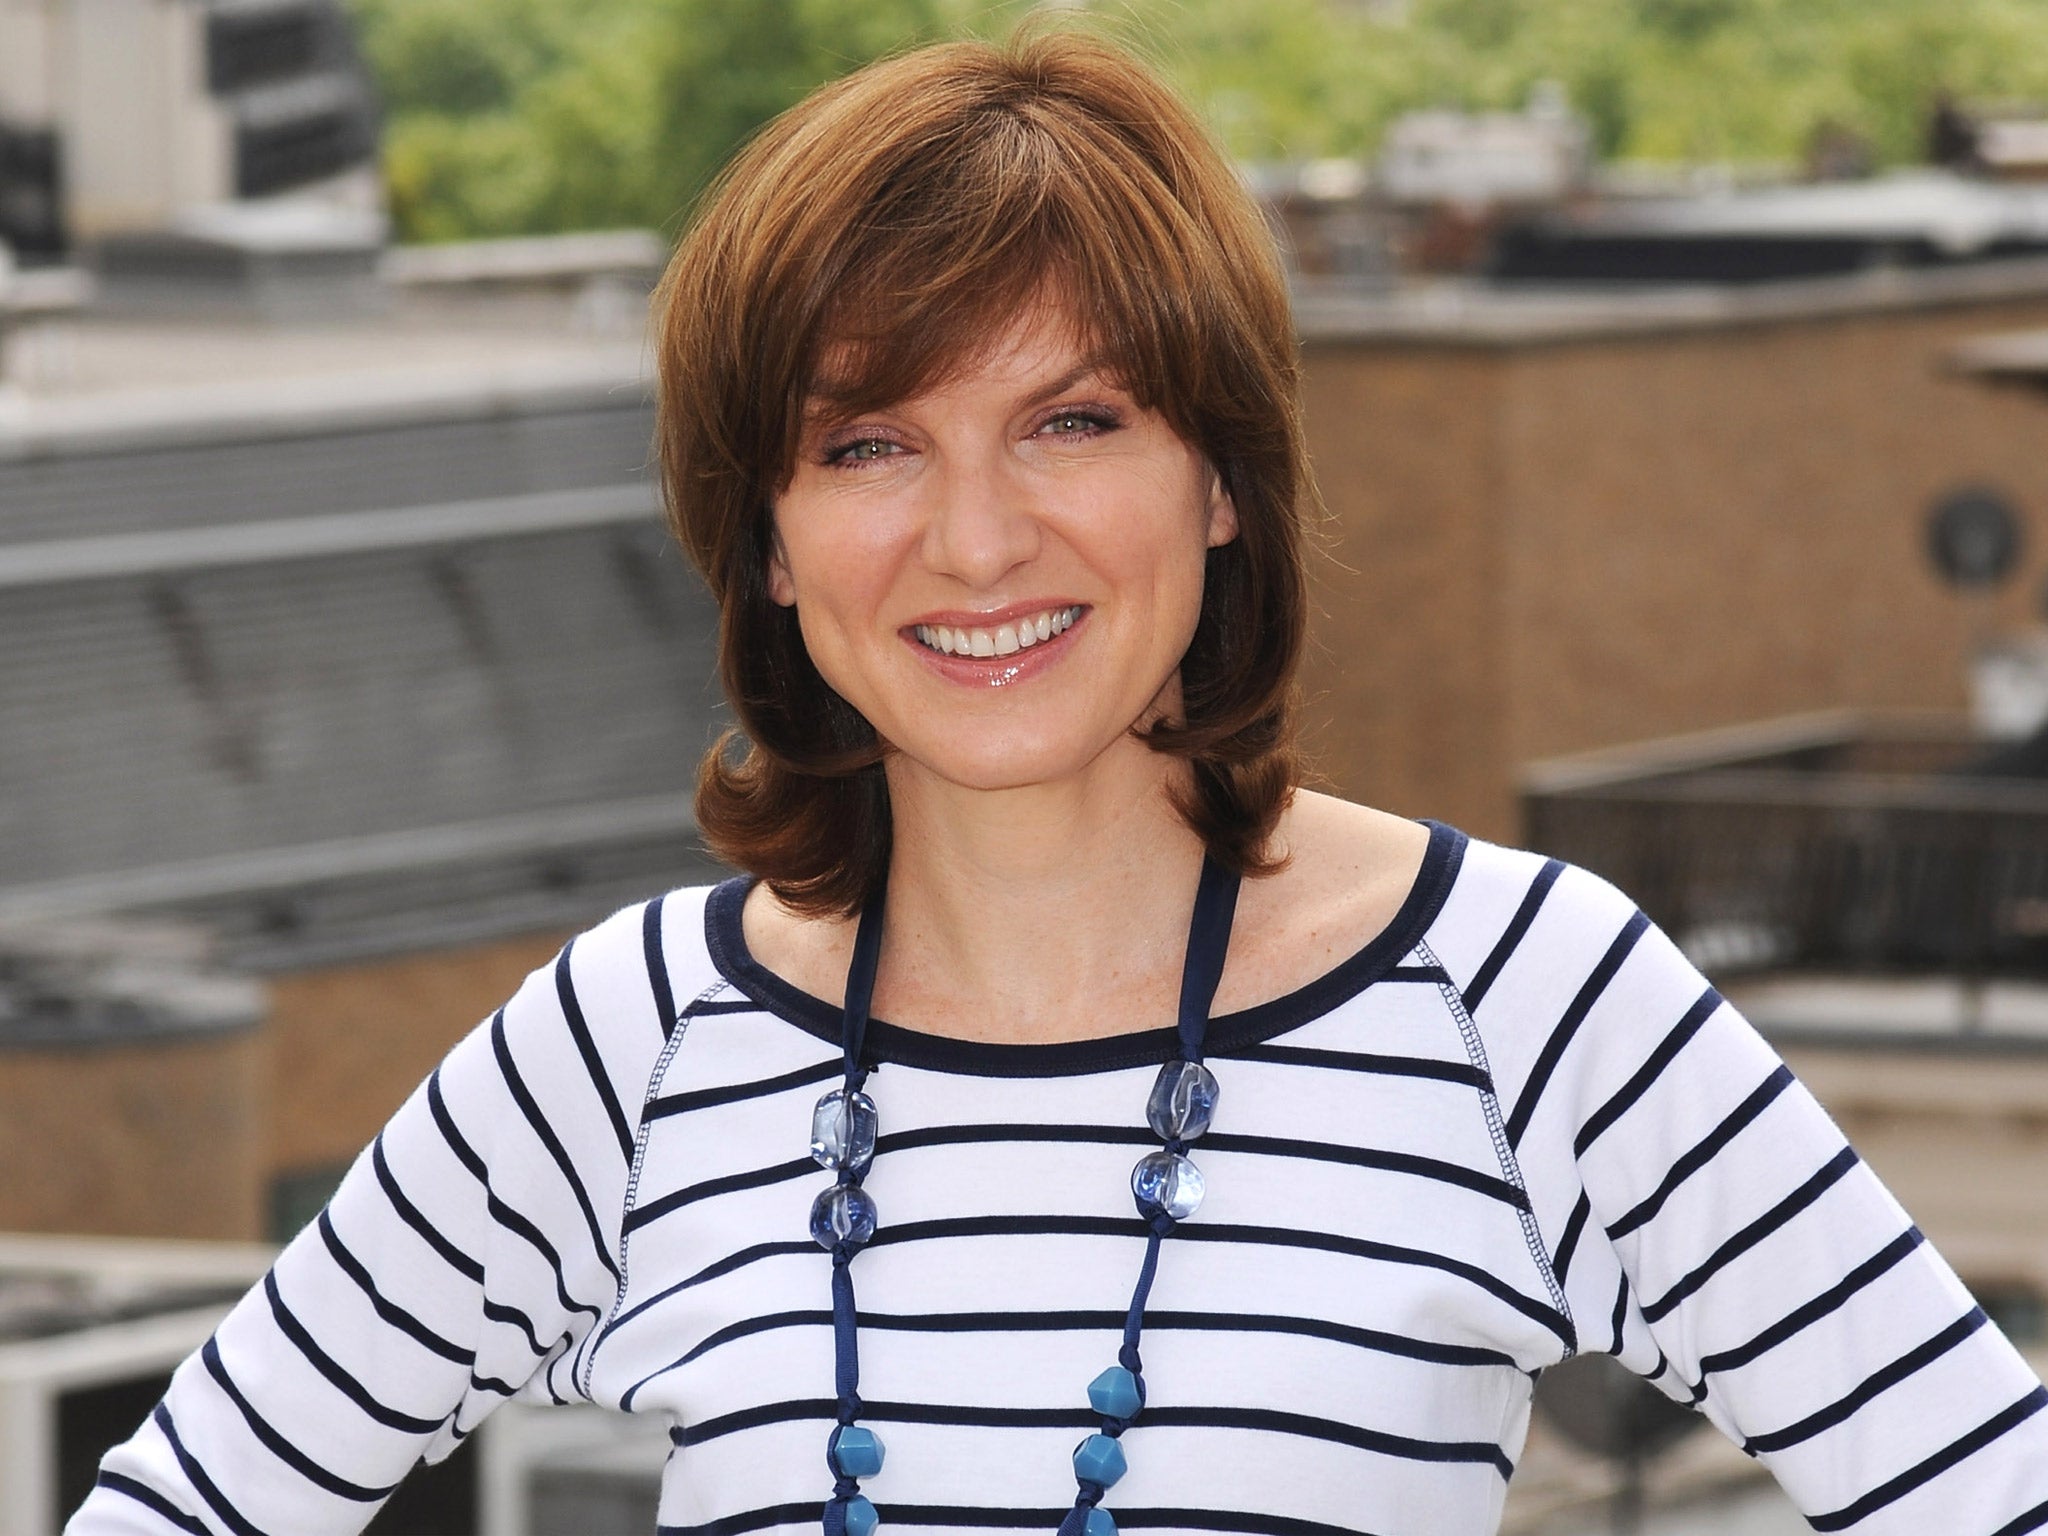 Fiona Bruce replaced David Dimbleby on Question Time in 2019